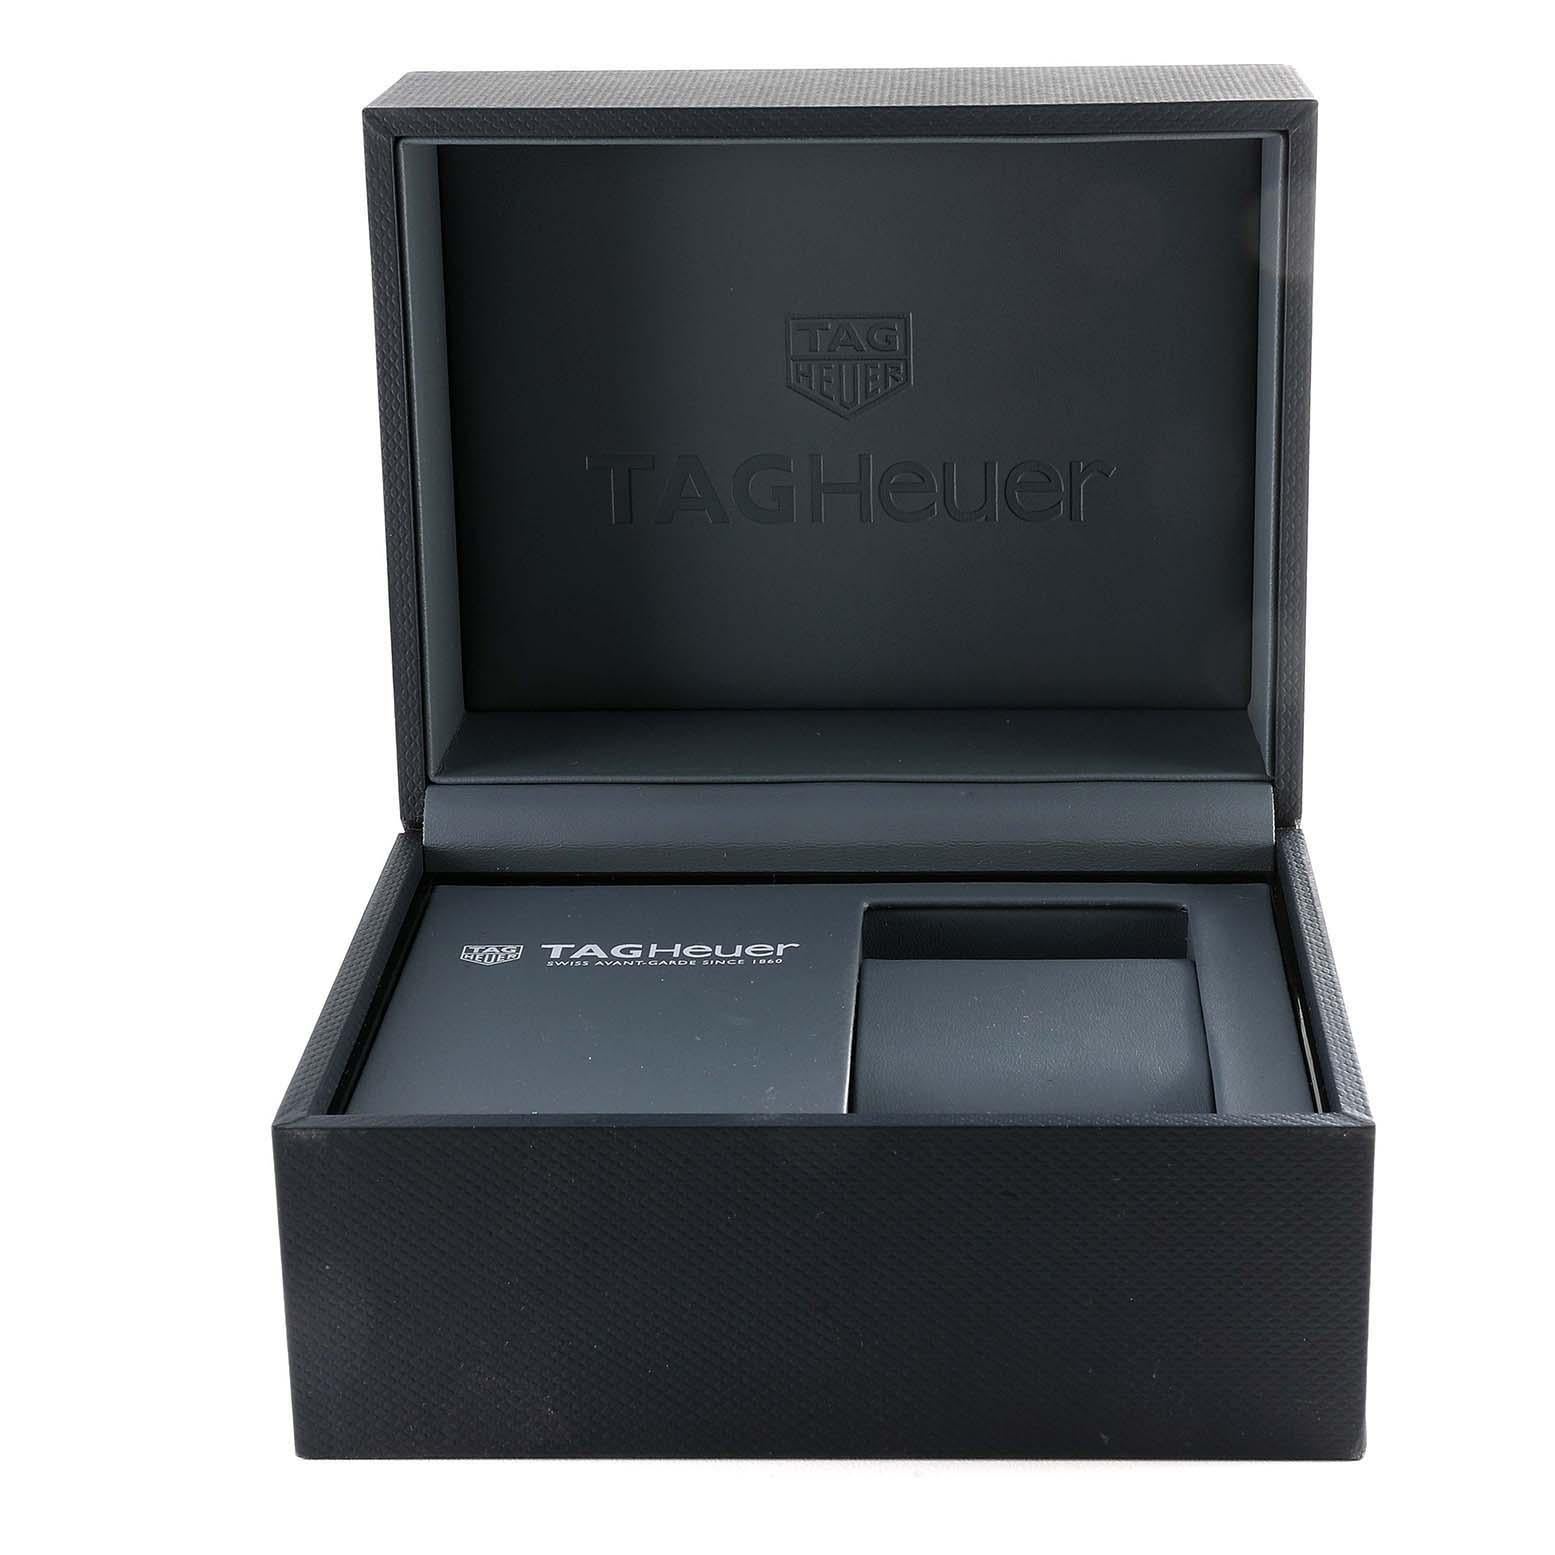 TAG Heuer Carrera Black Diamond Dial Steel Ladies Watch WV2412. Automatic self-winding movement. Stainless steel case 27.0 mm in diameter. Transparent exhibition sapphire crystal caseback. Original Tag Heuer factory diamond bezel. Scratch resistant